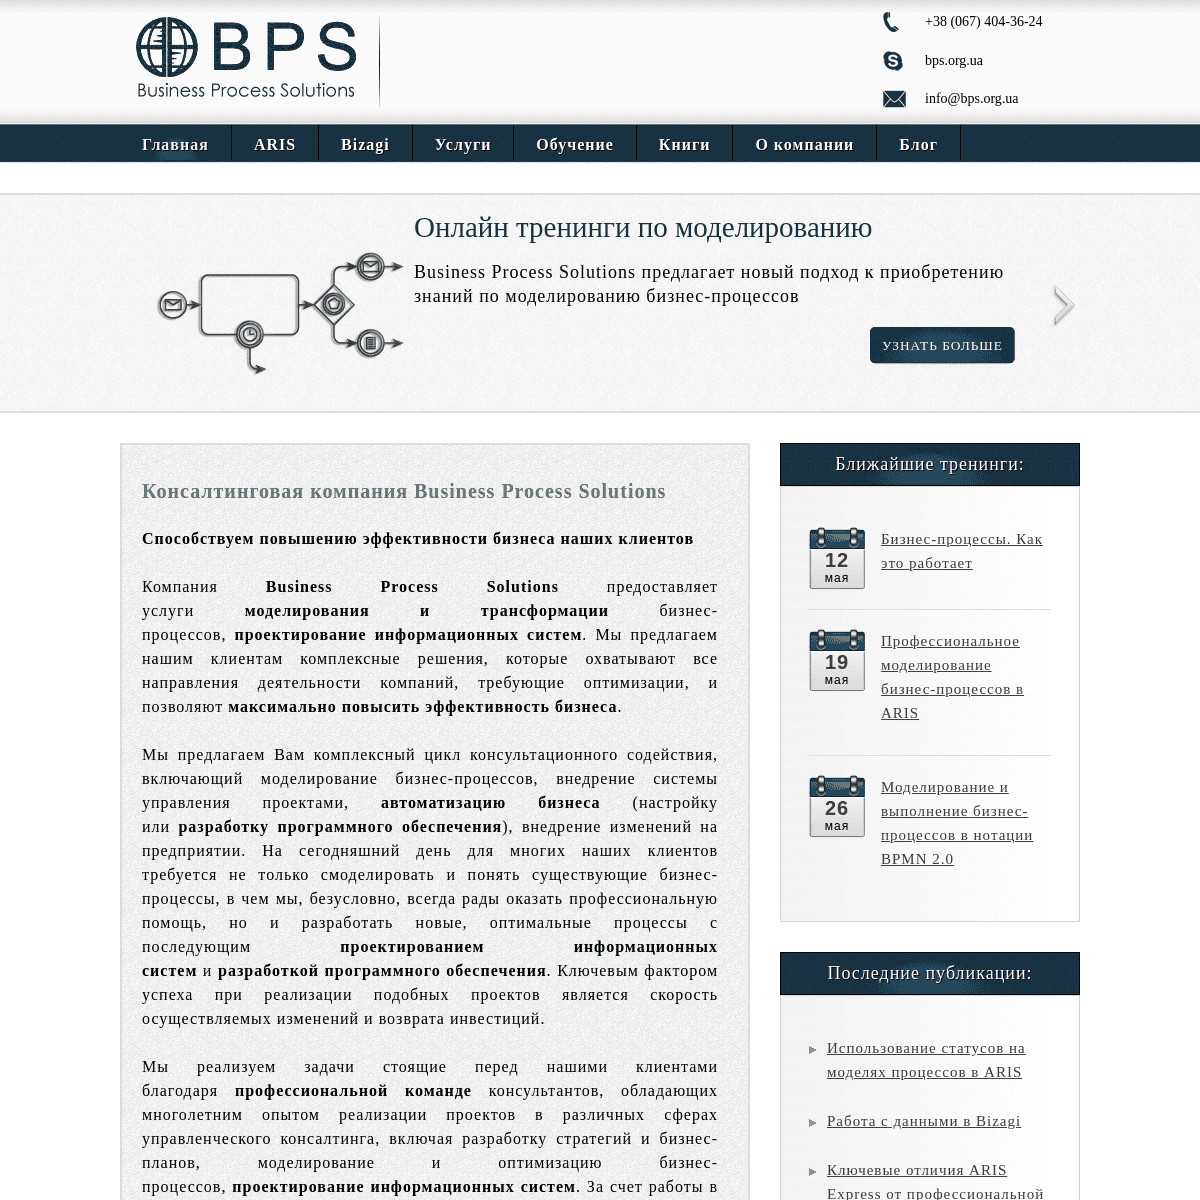 A complete backup of bps.org.ua